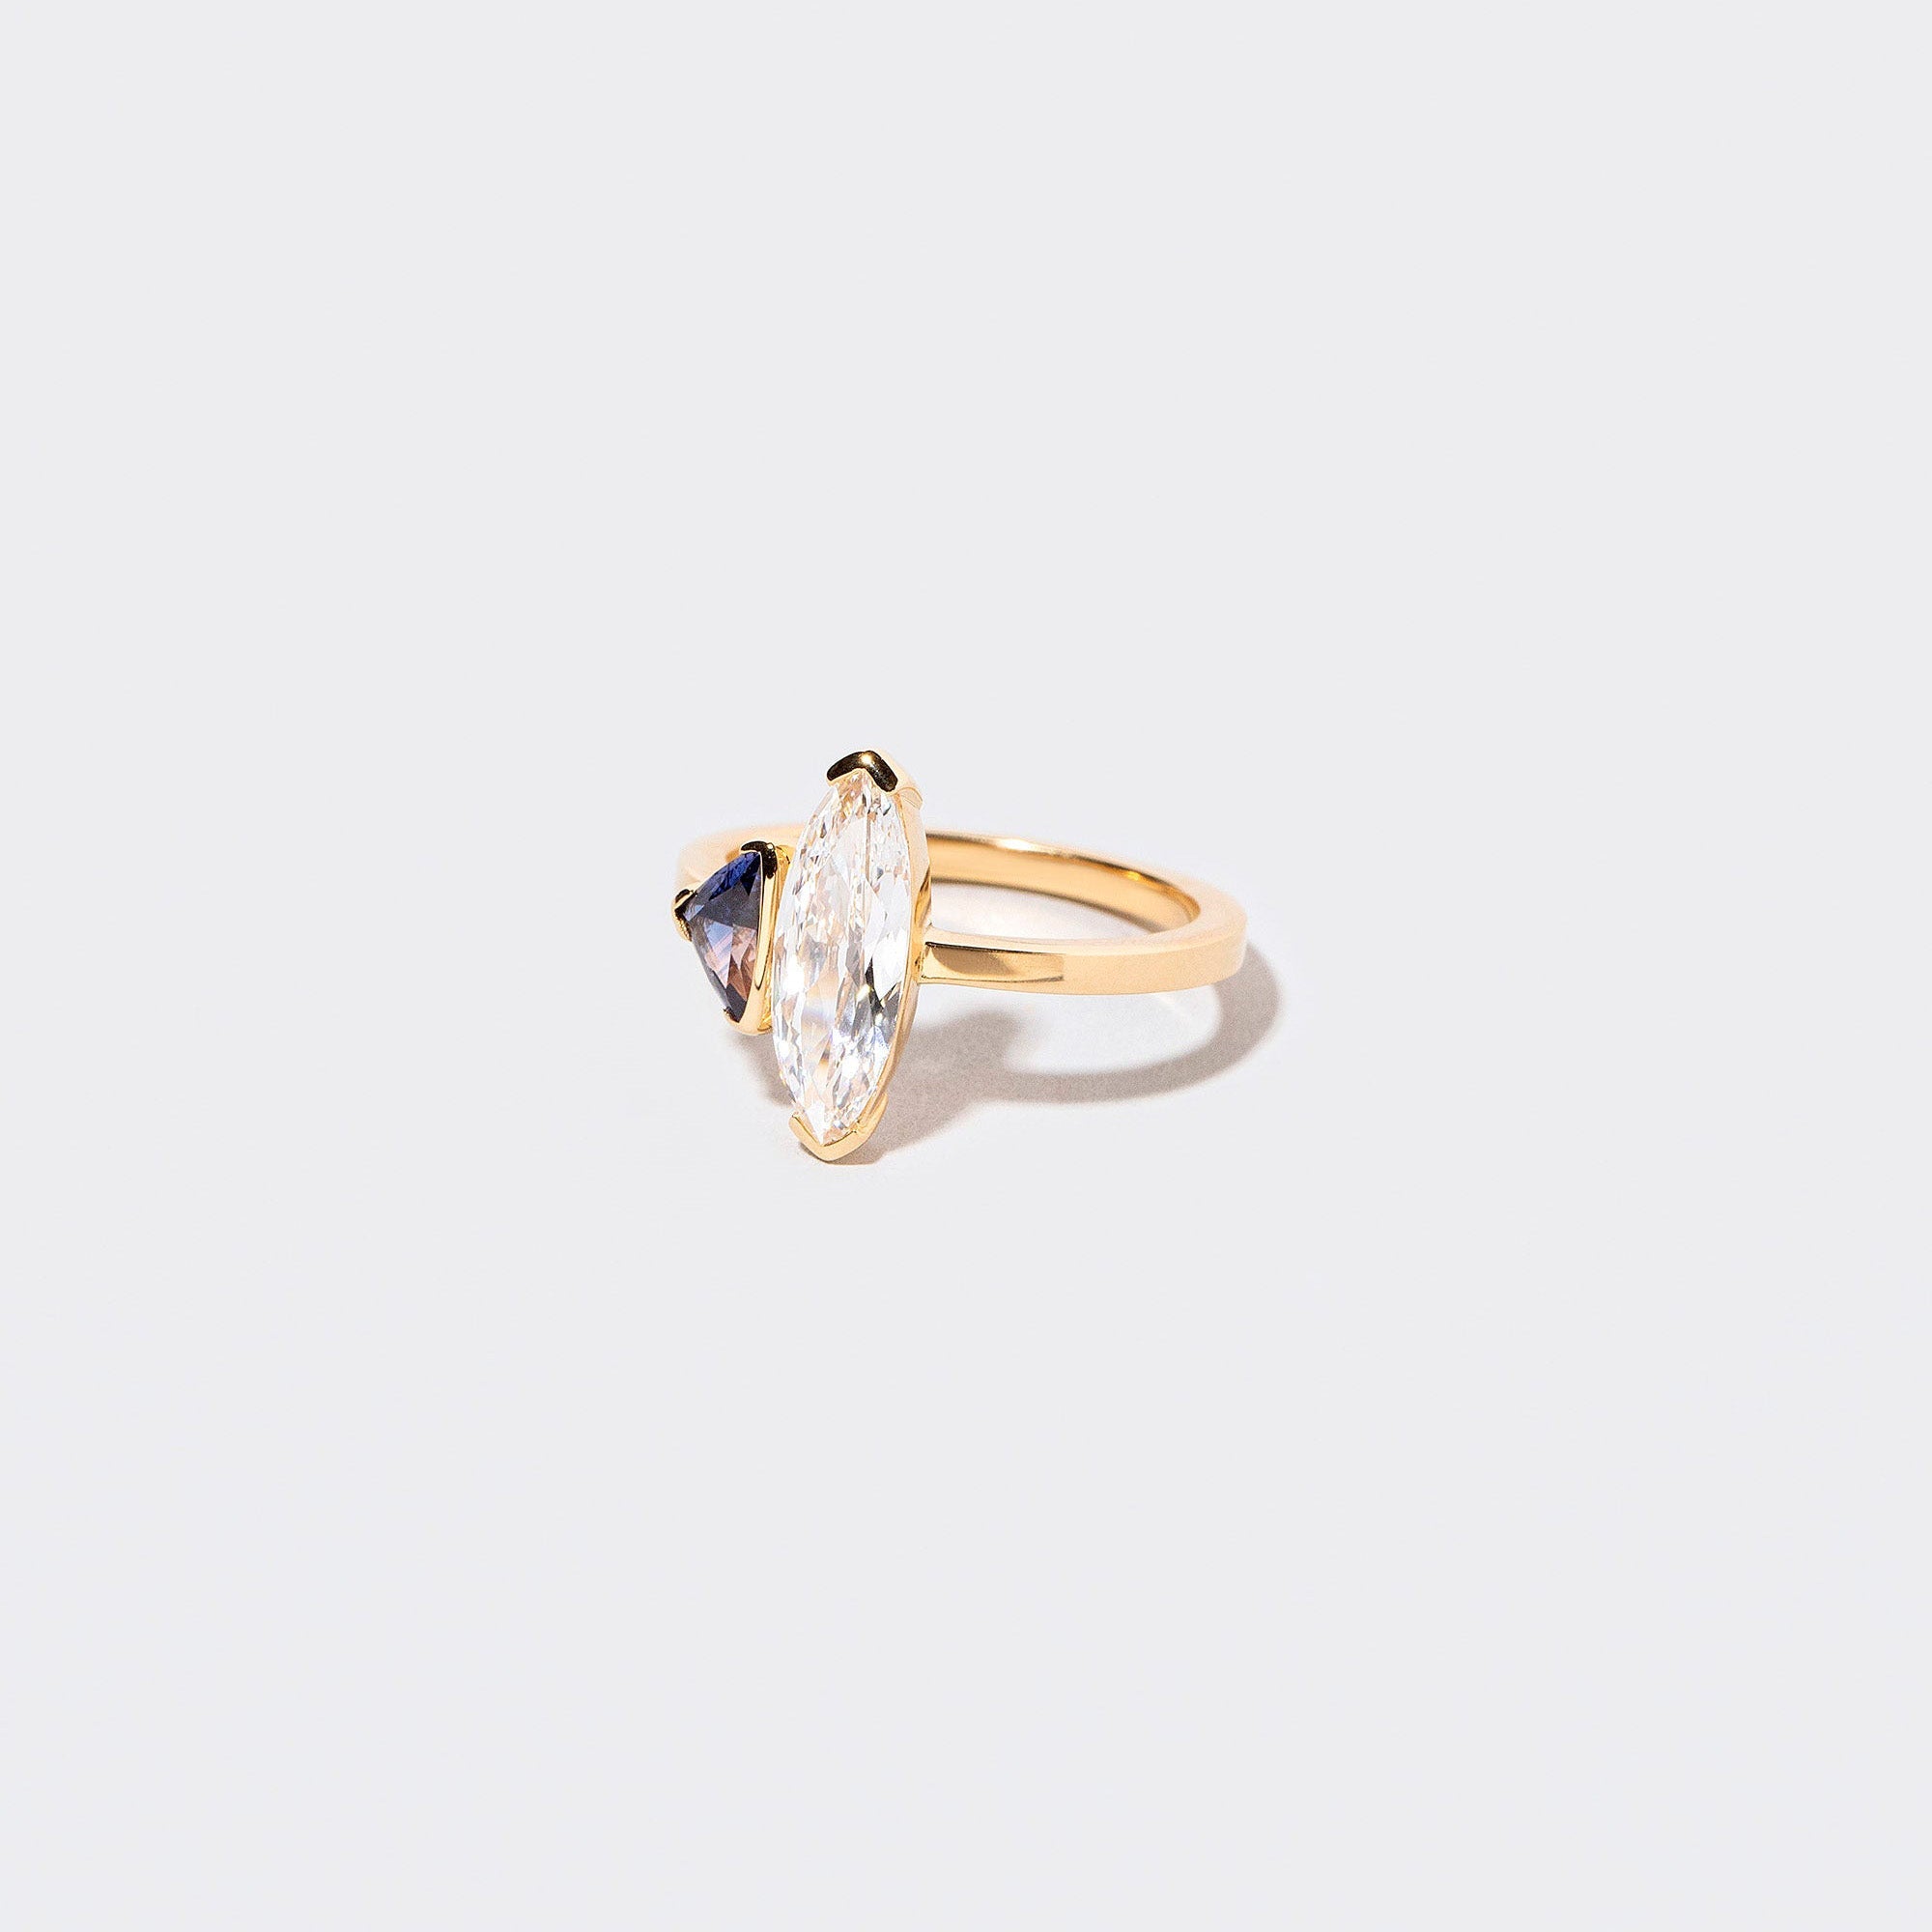 product_details::Illusion Ring on light colored background.